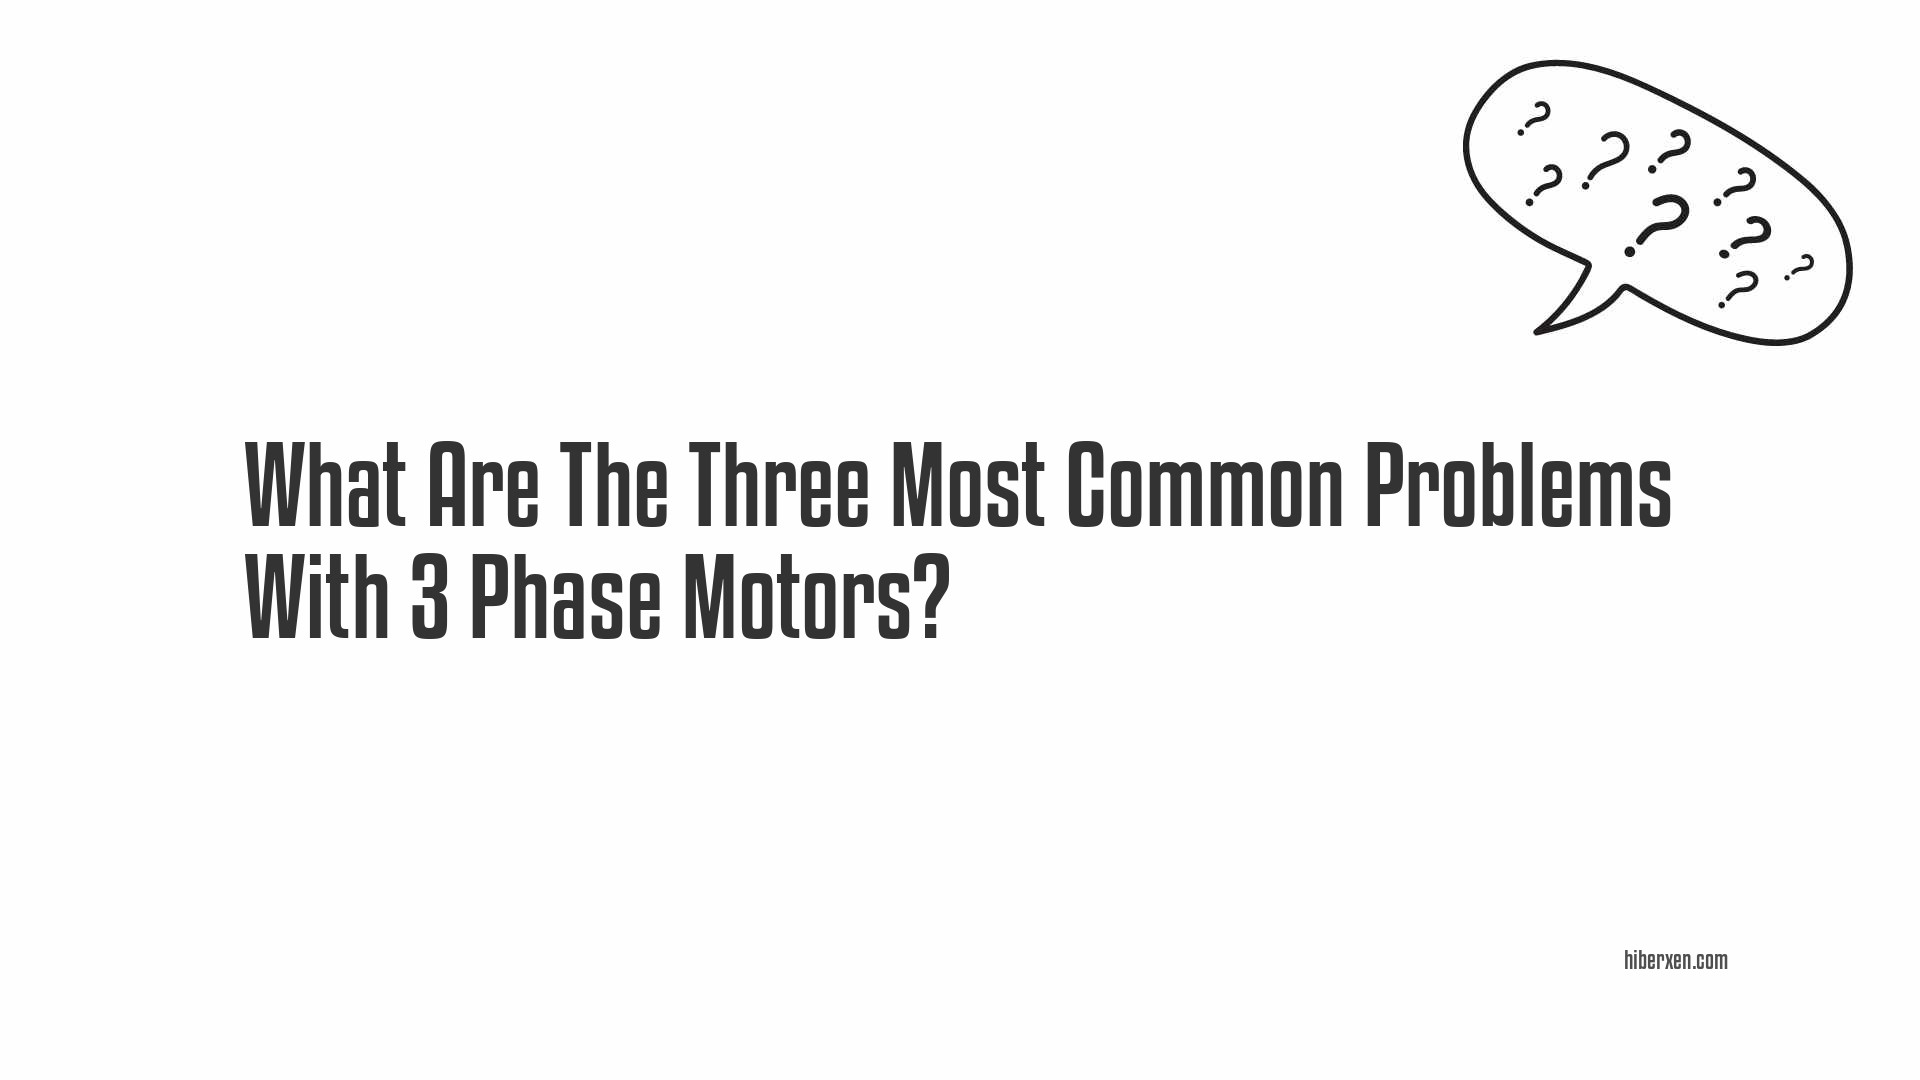 What Are The Three Most Common Problems With 3 Phase Motors?